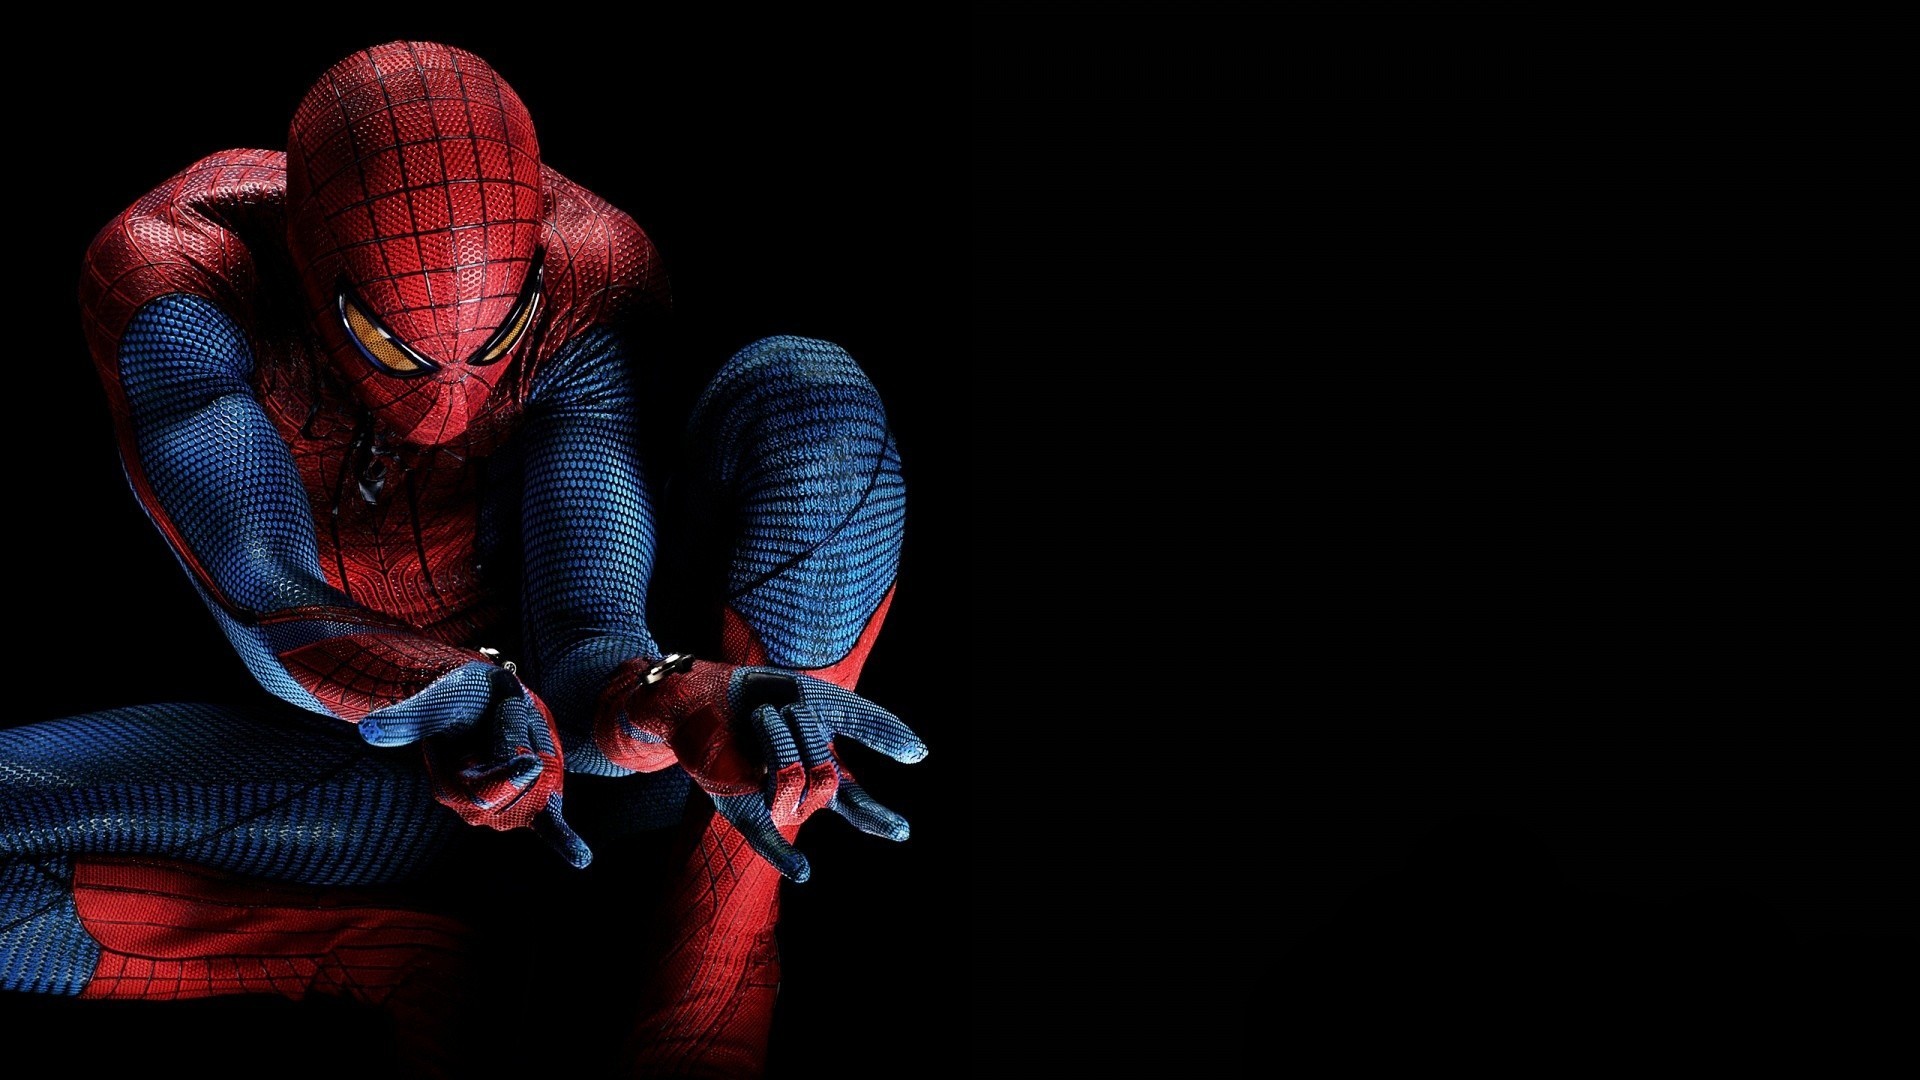 marvel hd wallpapers free download,spider man,fictional character,action figure,superhero,cg artwork